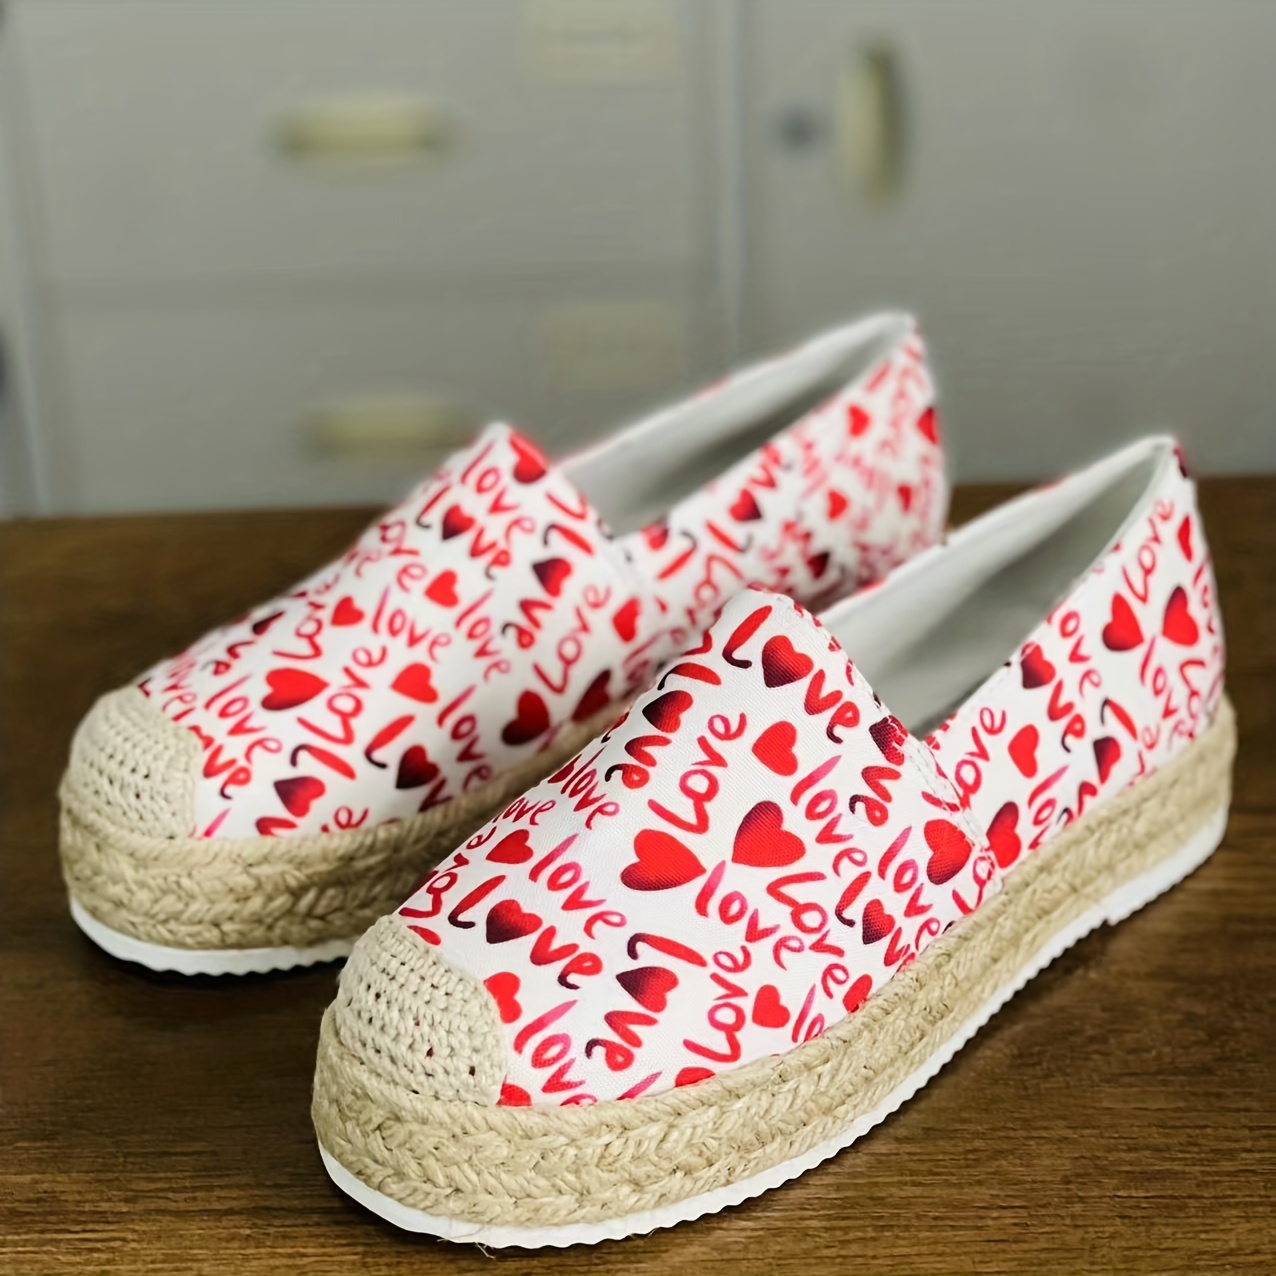 Love Moschino platform sneakers with heart motif in white